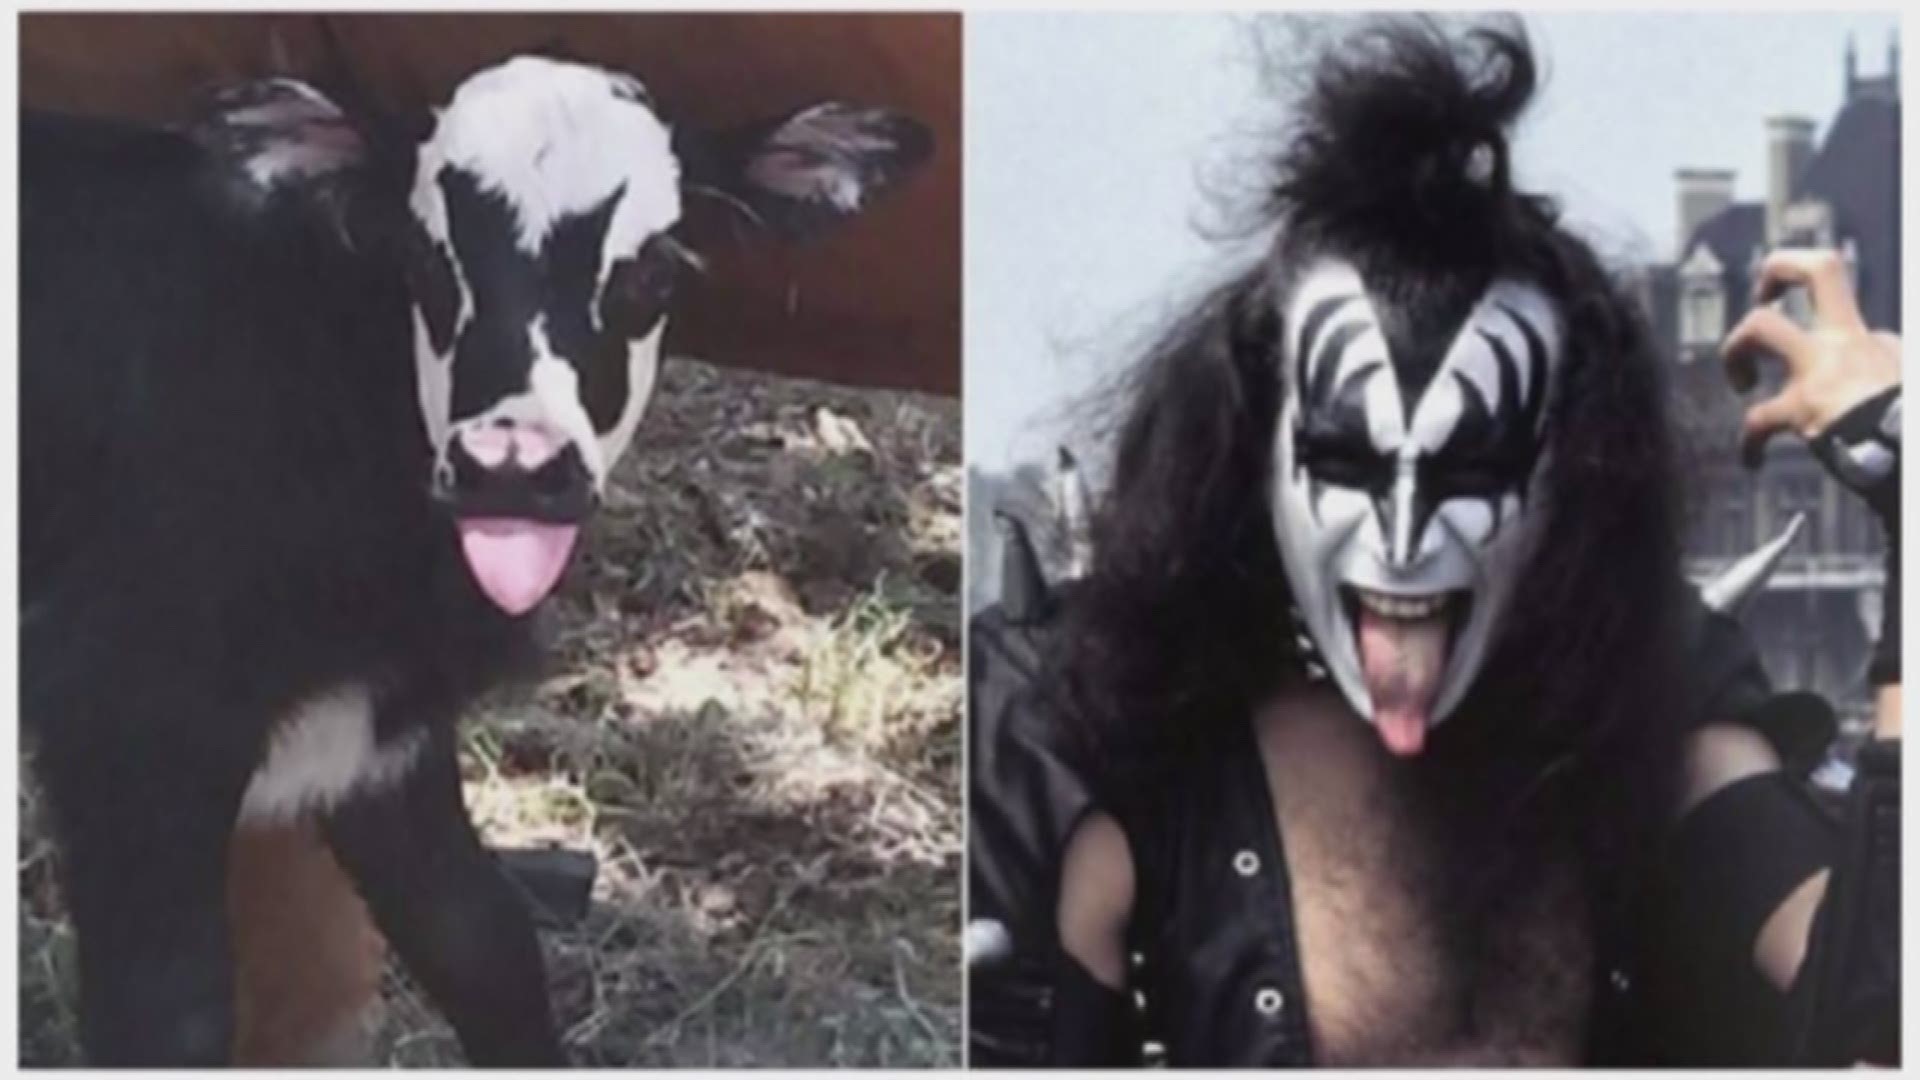 It's not often that an animal has a celebrity twin. But this Kerrville cow does! Meet Genie, who looks just like KISS rocker Gene Simmons.